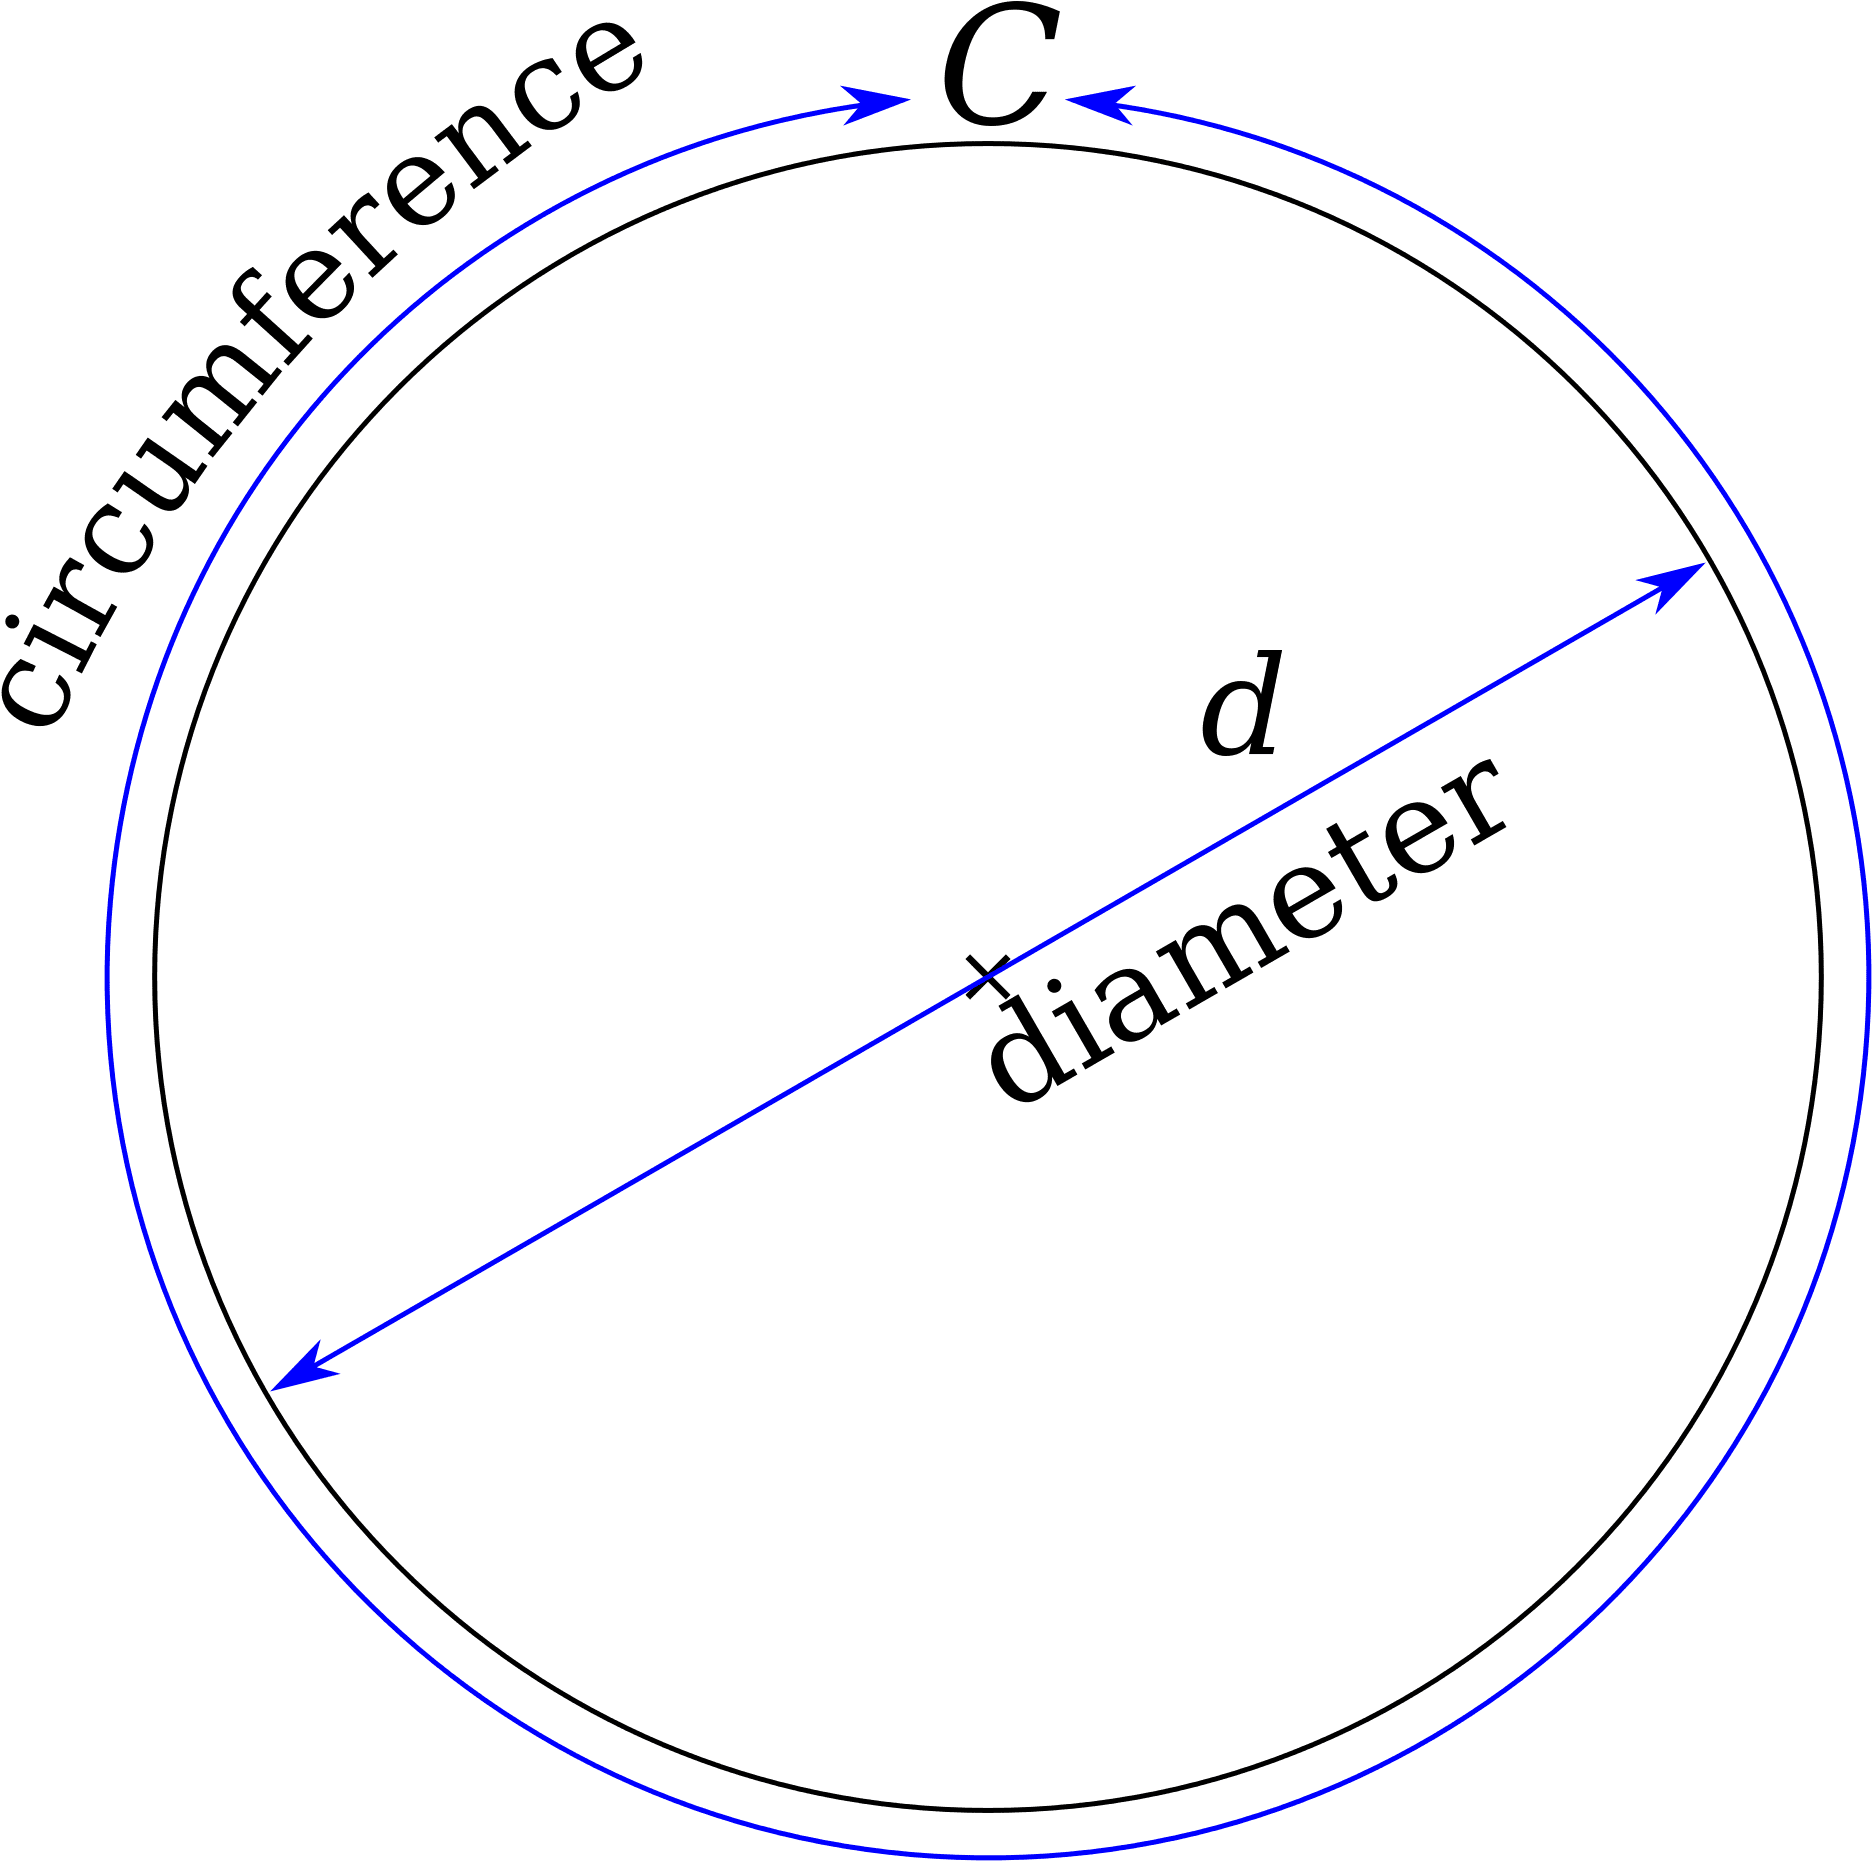 Download 22 7 Is Not The Most Accurate Fraction For P Diameter Circumference Png Image With No Background Pngkey Com